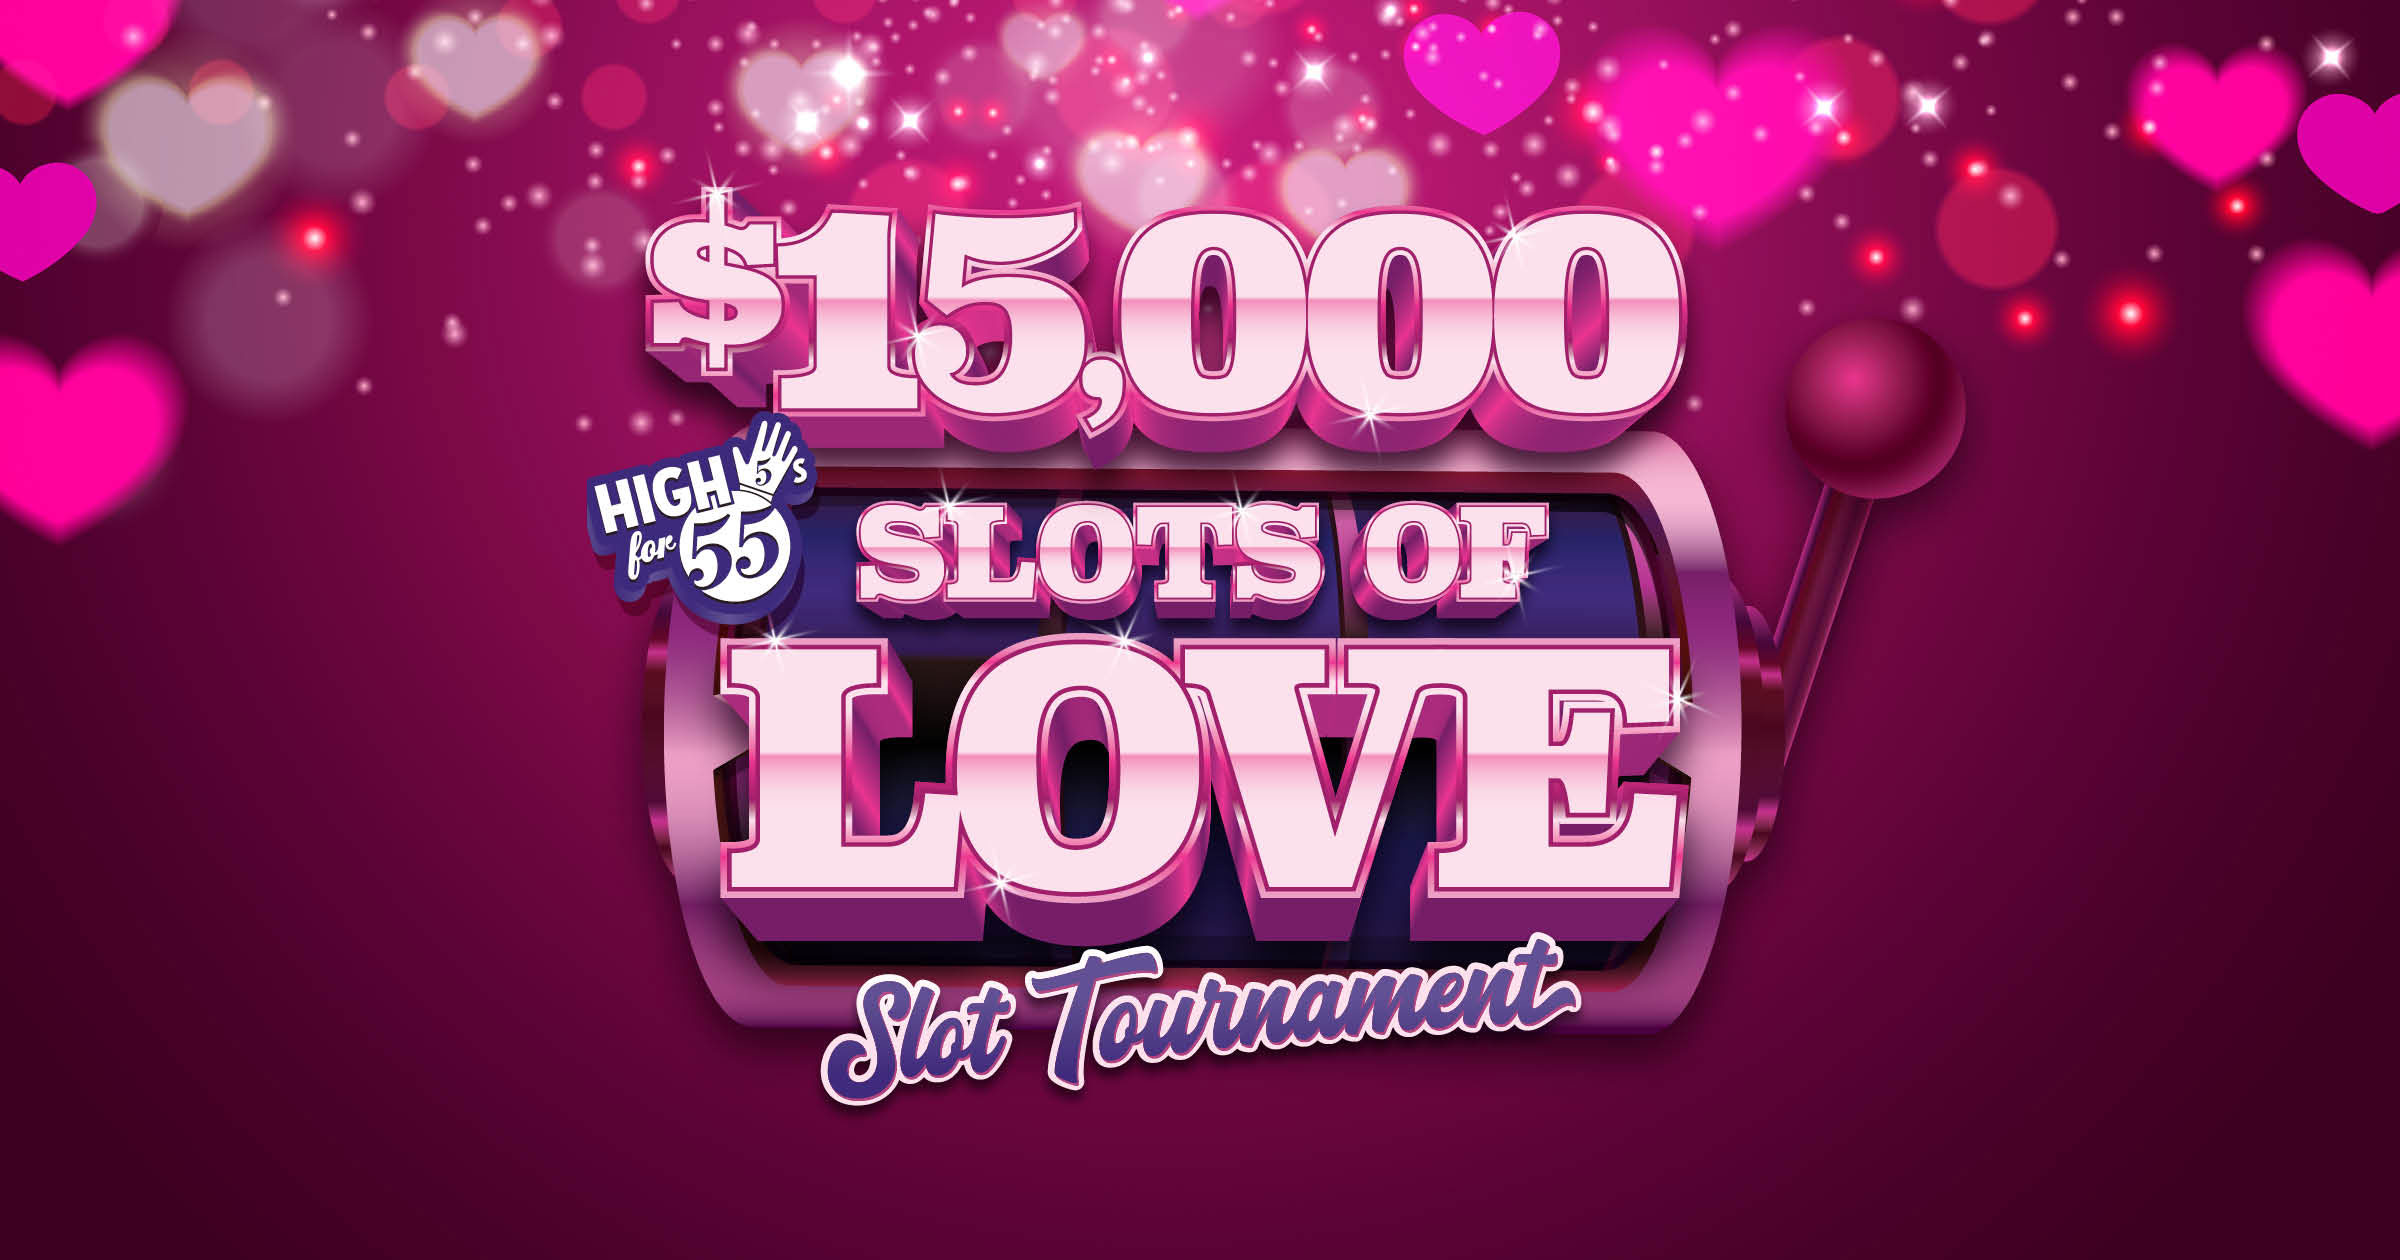 High 5’s for 55 – $15,000 Cash Slots of Love Slot Tournament